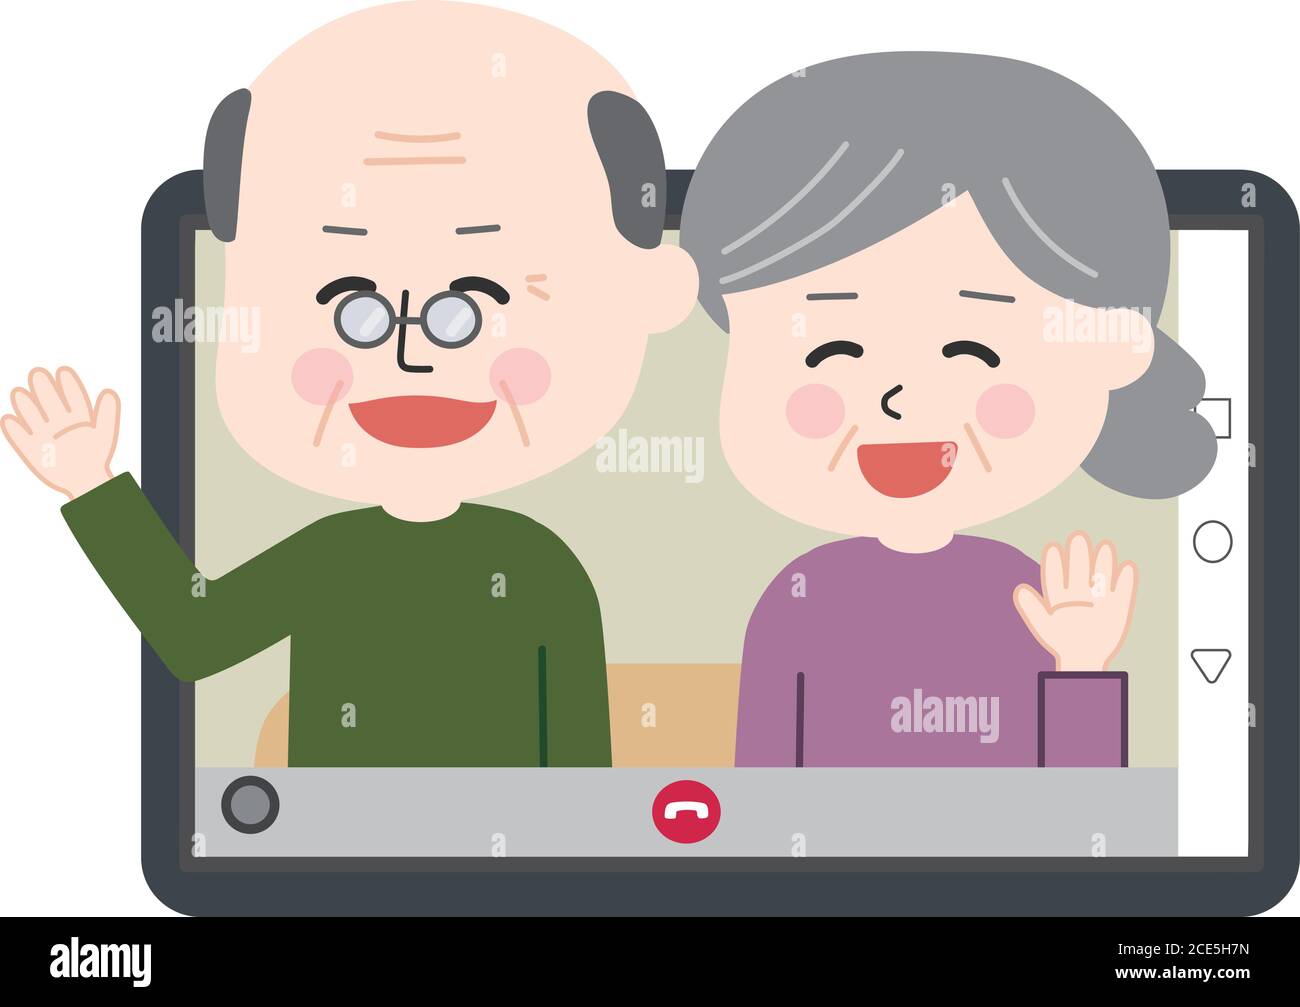 Grandpa and grandma sitting on the sofa and having video call on tablet or smartphone. Vector illustration isolated on white background. Stock Vector